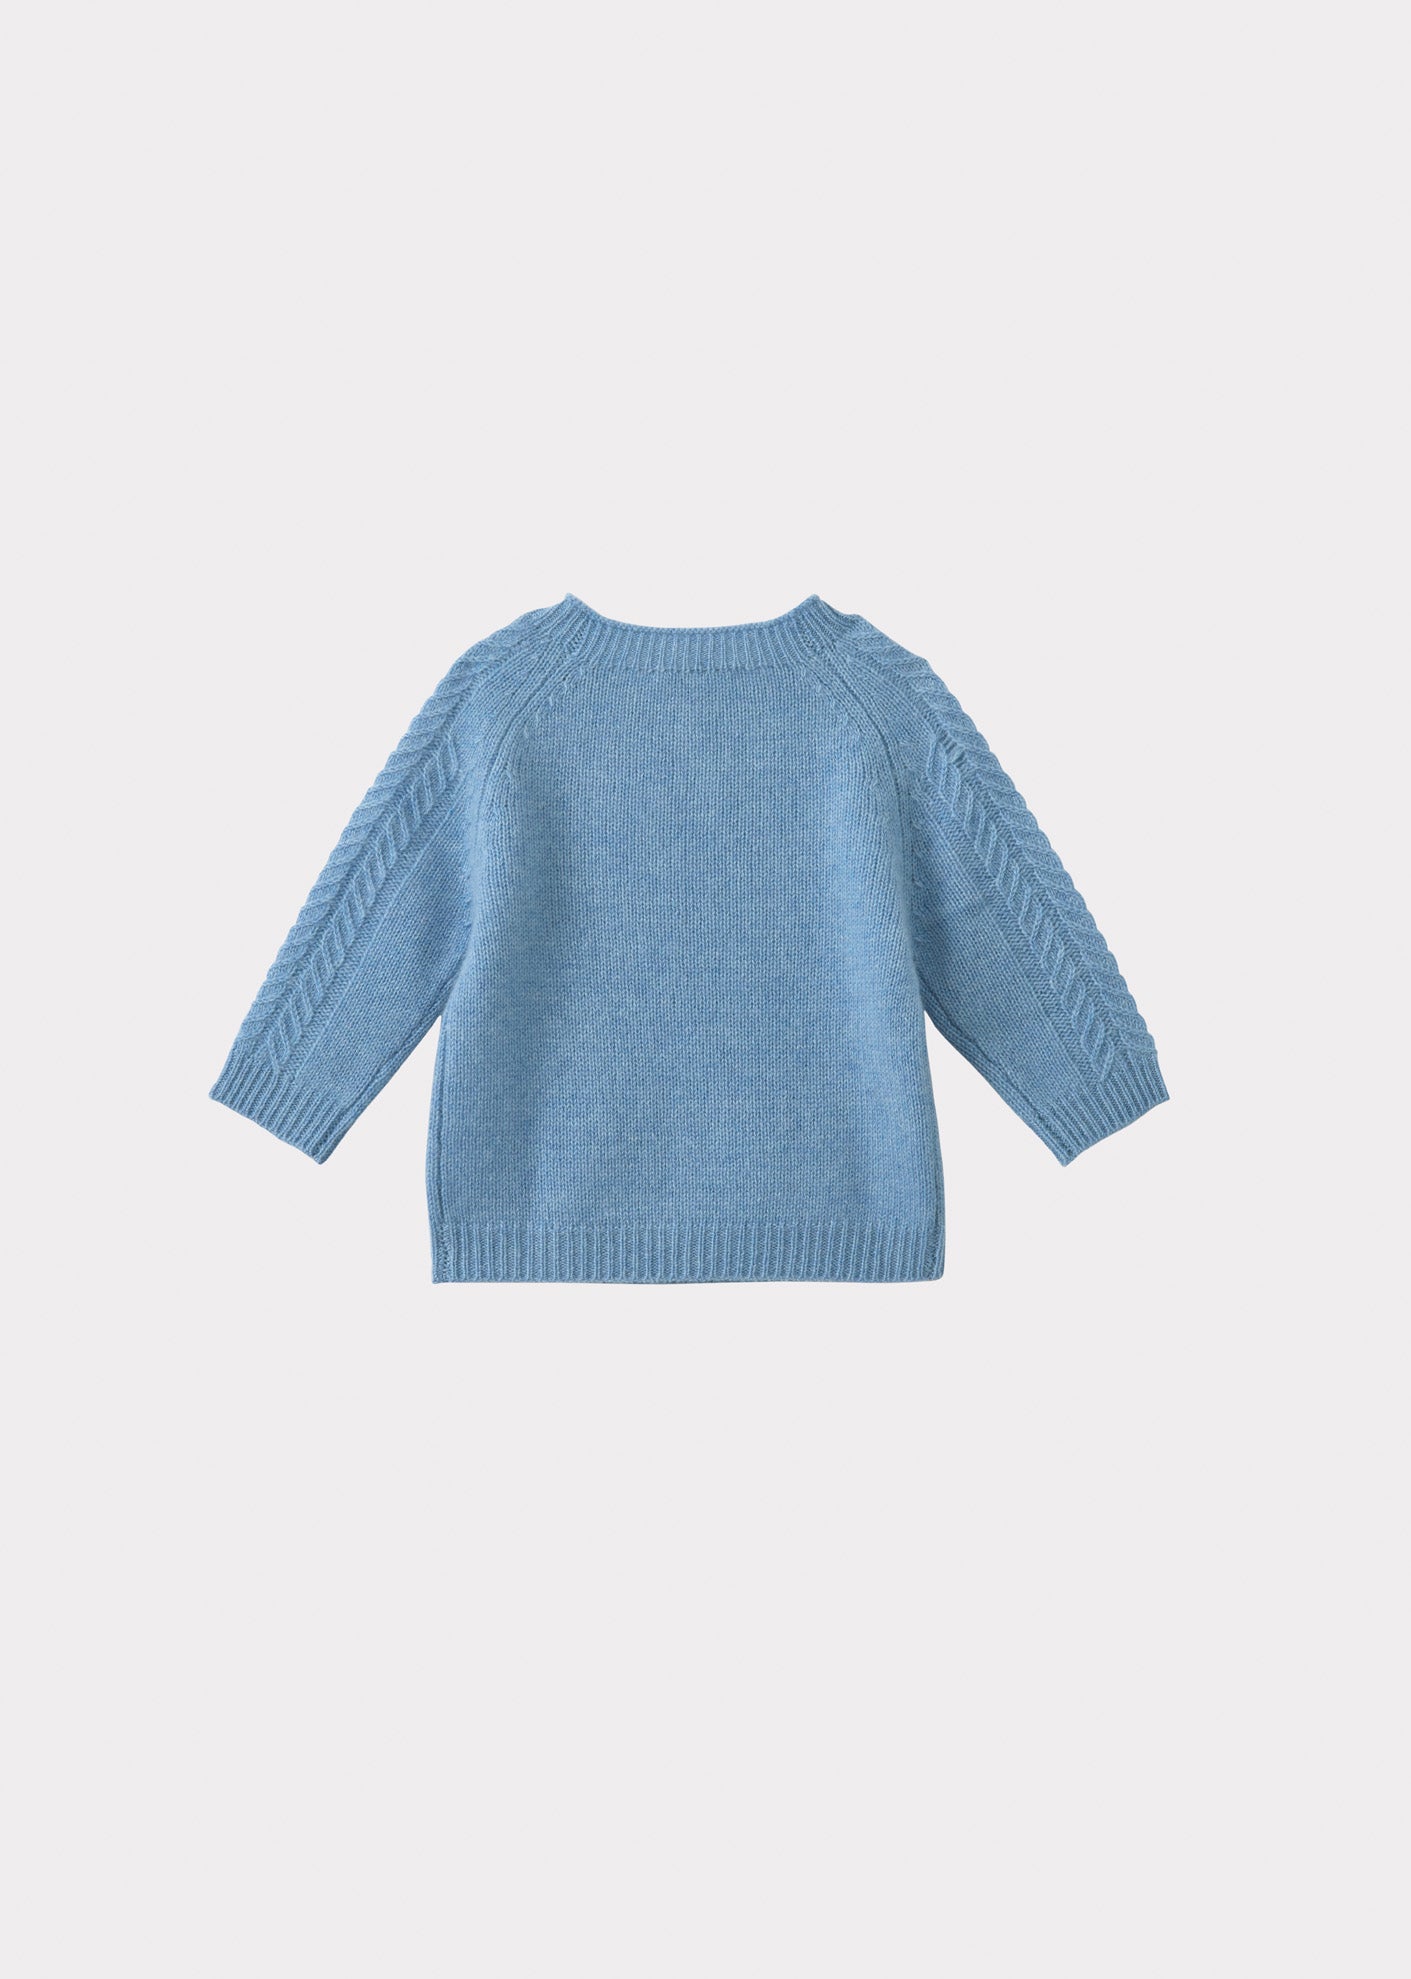 SCOUT BABY JUMPER - SKY BLUE